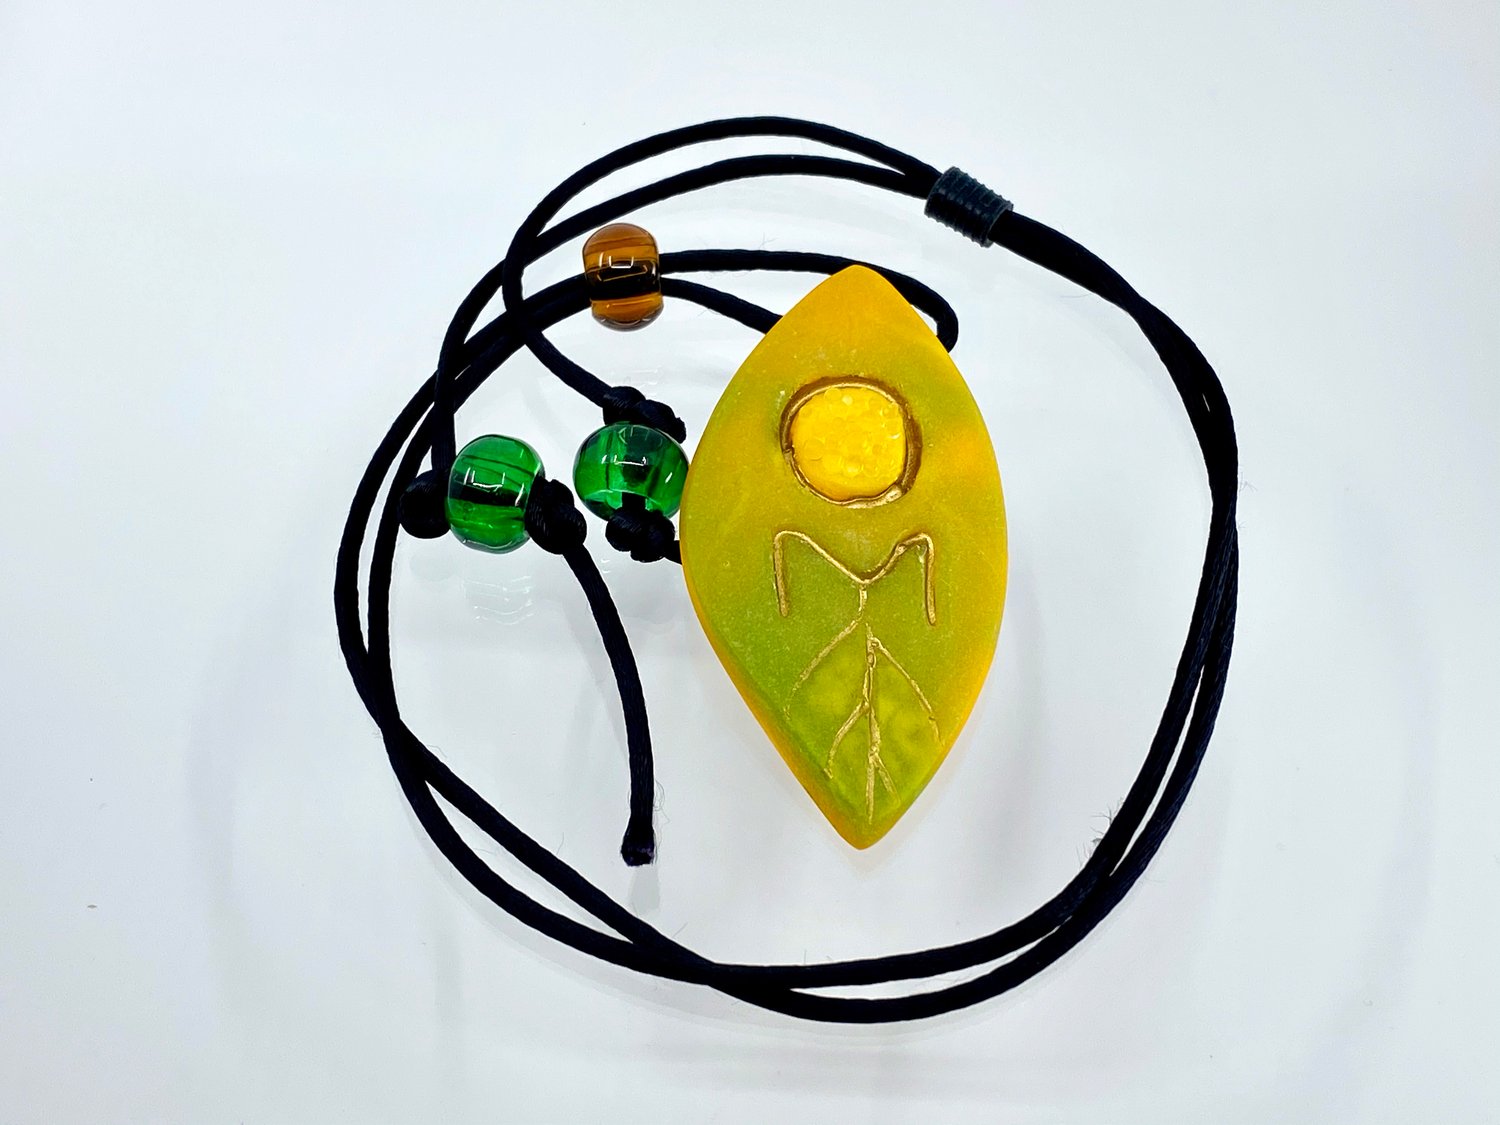 Image of Pate de Verre Glass "OM" Lotus Petal Shaped Pendant in Yellows and Greens